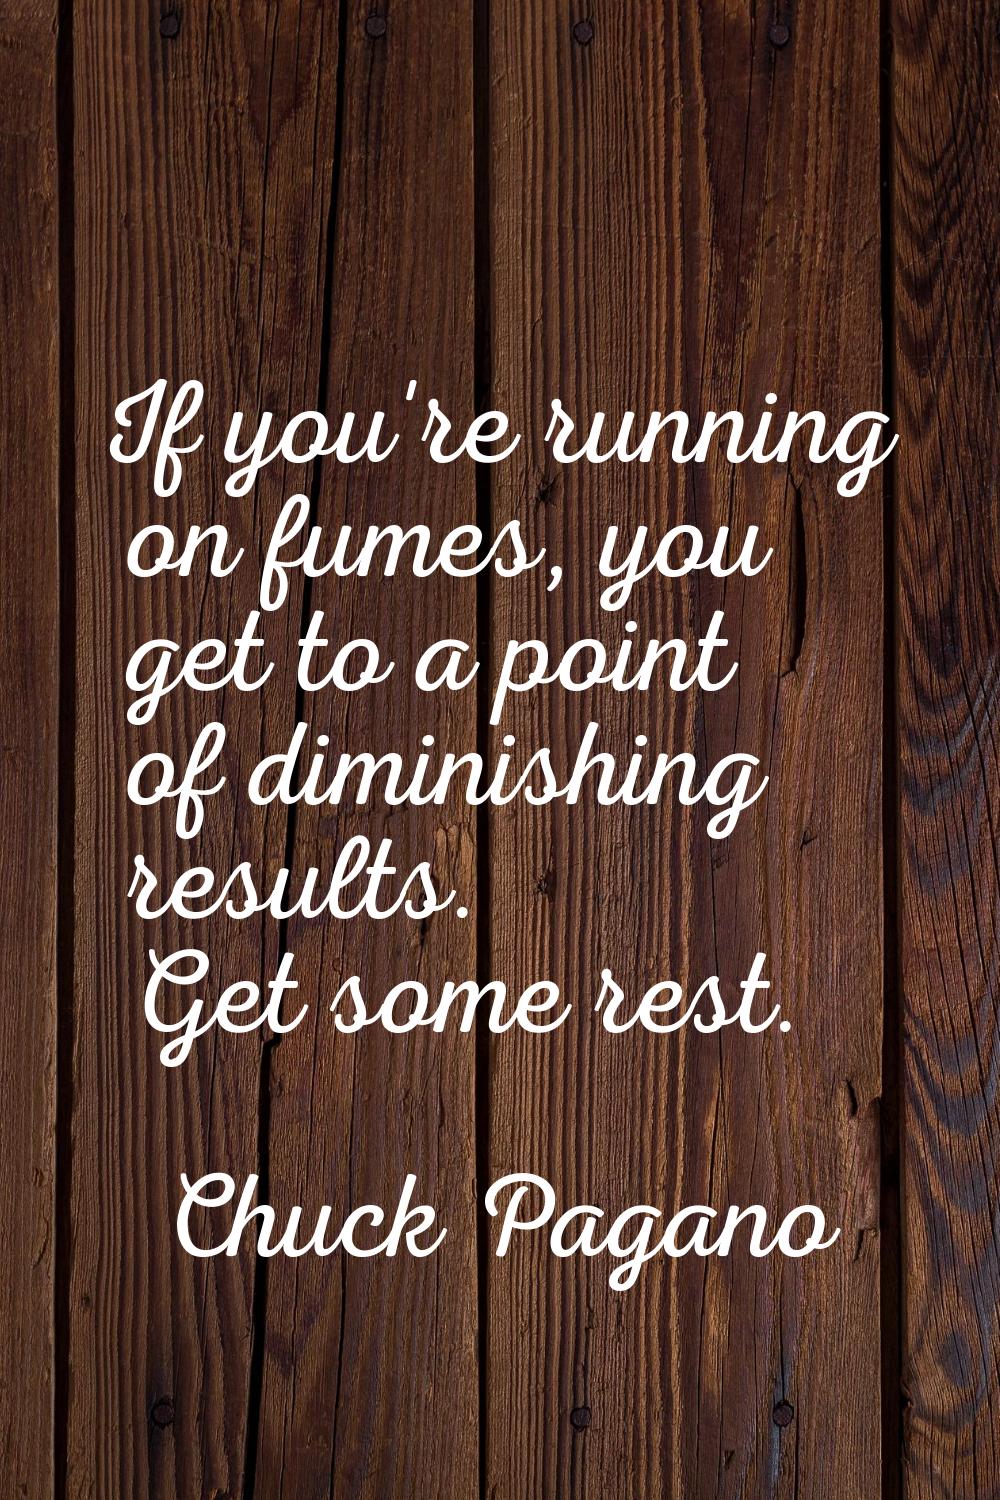 If you're running on fumes, you get to a point of diminishing results. Get some rest.